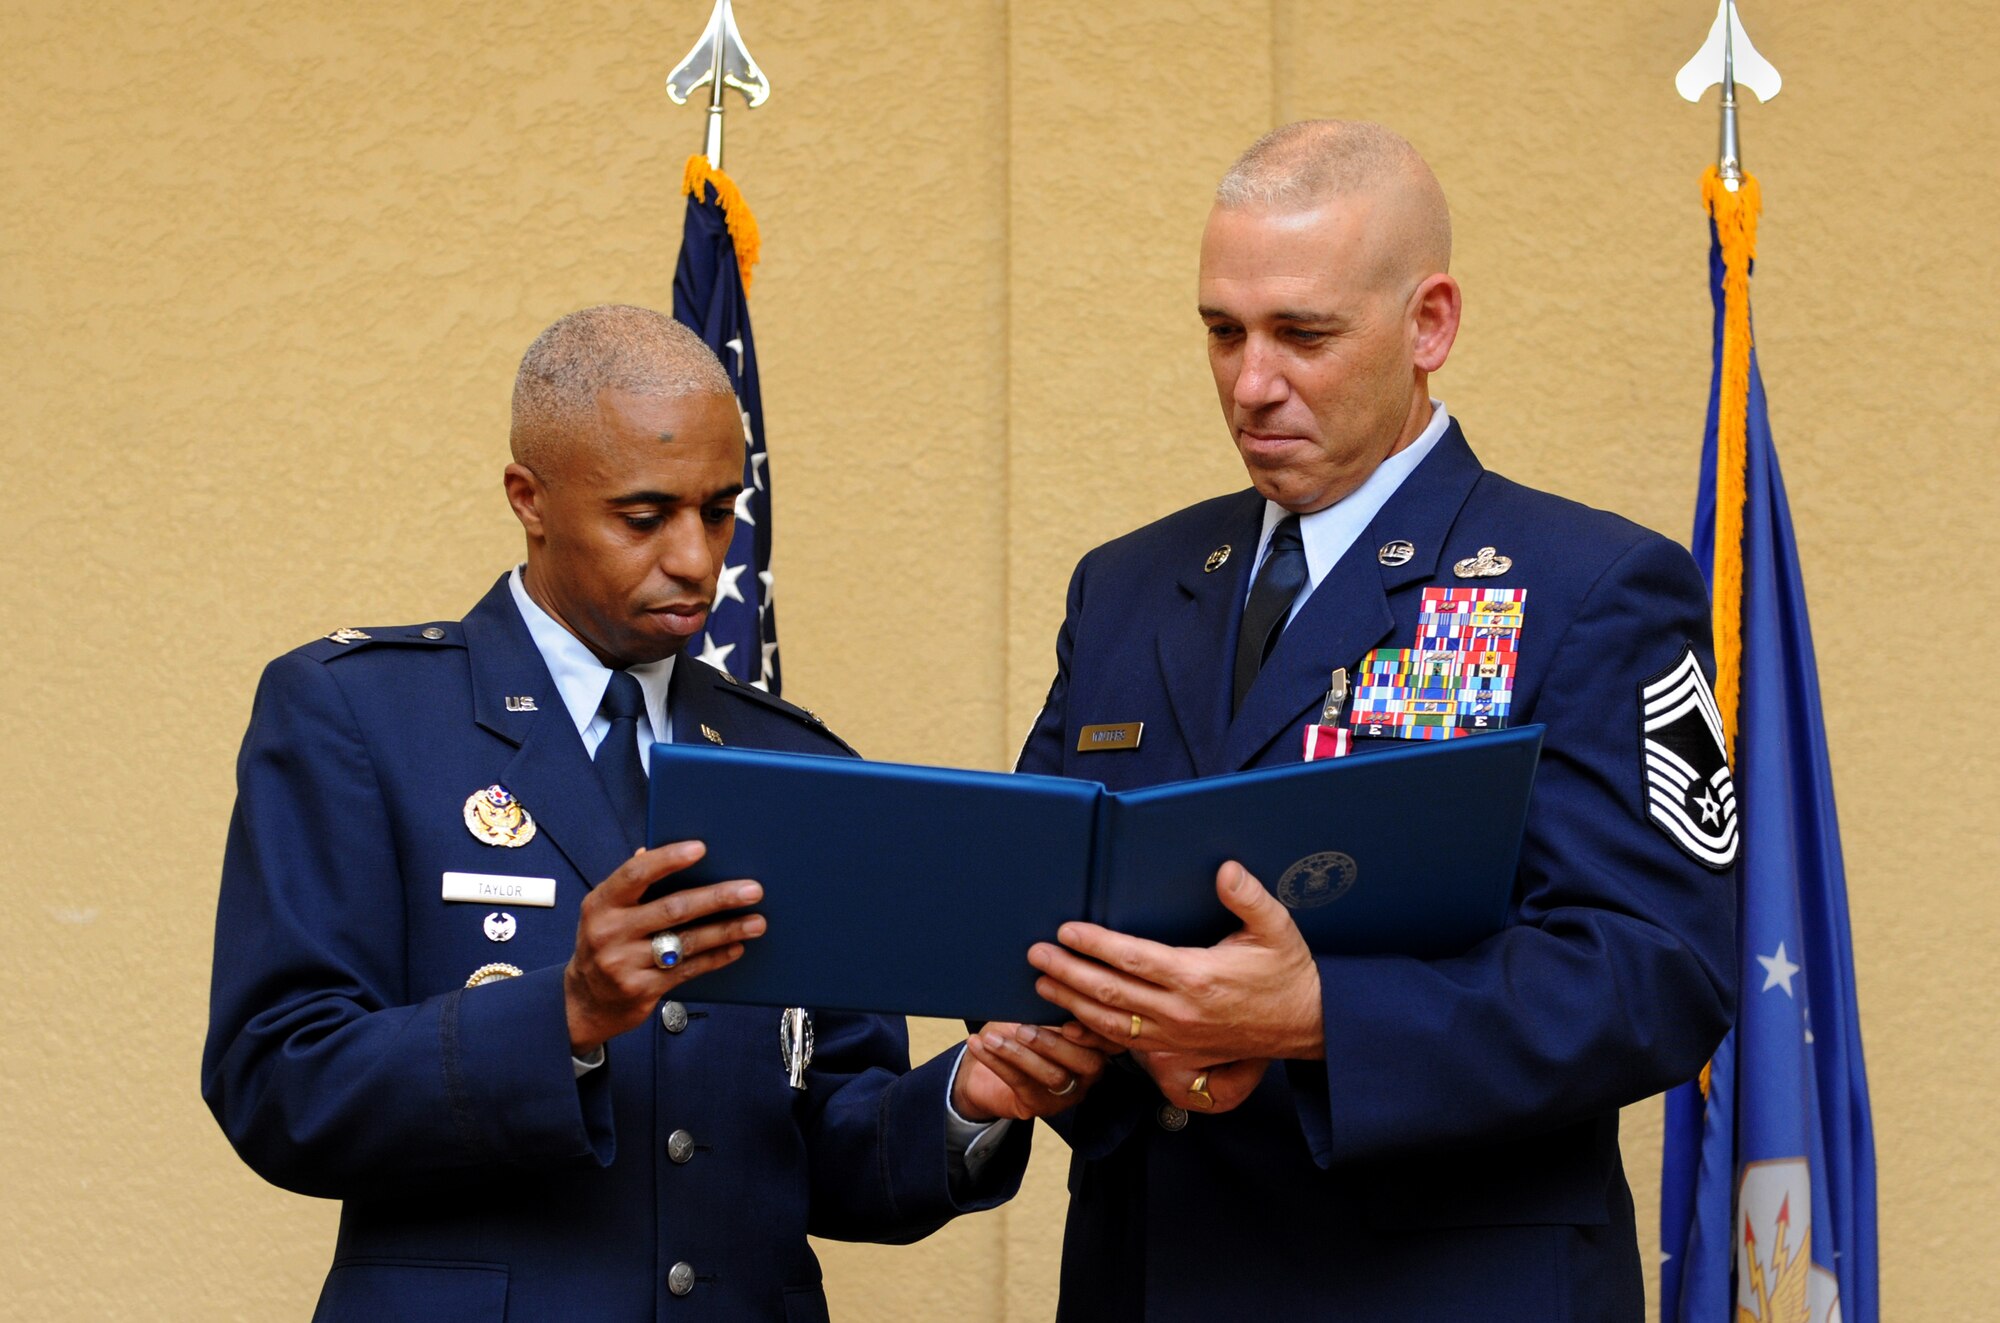 Col. Fred Taylor, Jr., Joint Space Operations Center deputy director and National Reconnaissance Office Liaison, Vandenberg Air Force Base, Calif., presents a certificate of appreciation to Chief Master Sgt. Robert Winters, 81st Training Group superintendent, during his retirement ceremony at the Bay Breeze Event Center Sept. 8, 2016, on Keesler AFB, Miss. Winters retired with more than 29 years of military service and served multiple assignments in California, Louisiana, Georgia, Colorado, Korea and the United Kingdom. He also worked as an electronic warfare officer in support of more than 700 soldiers in multiple locations throughout Iraq. (U.S. Air Force photo by Kemberly Groue/Released)